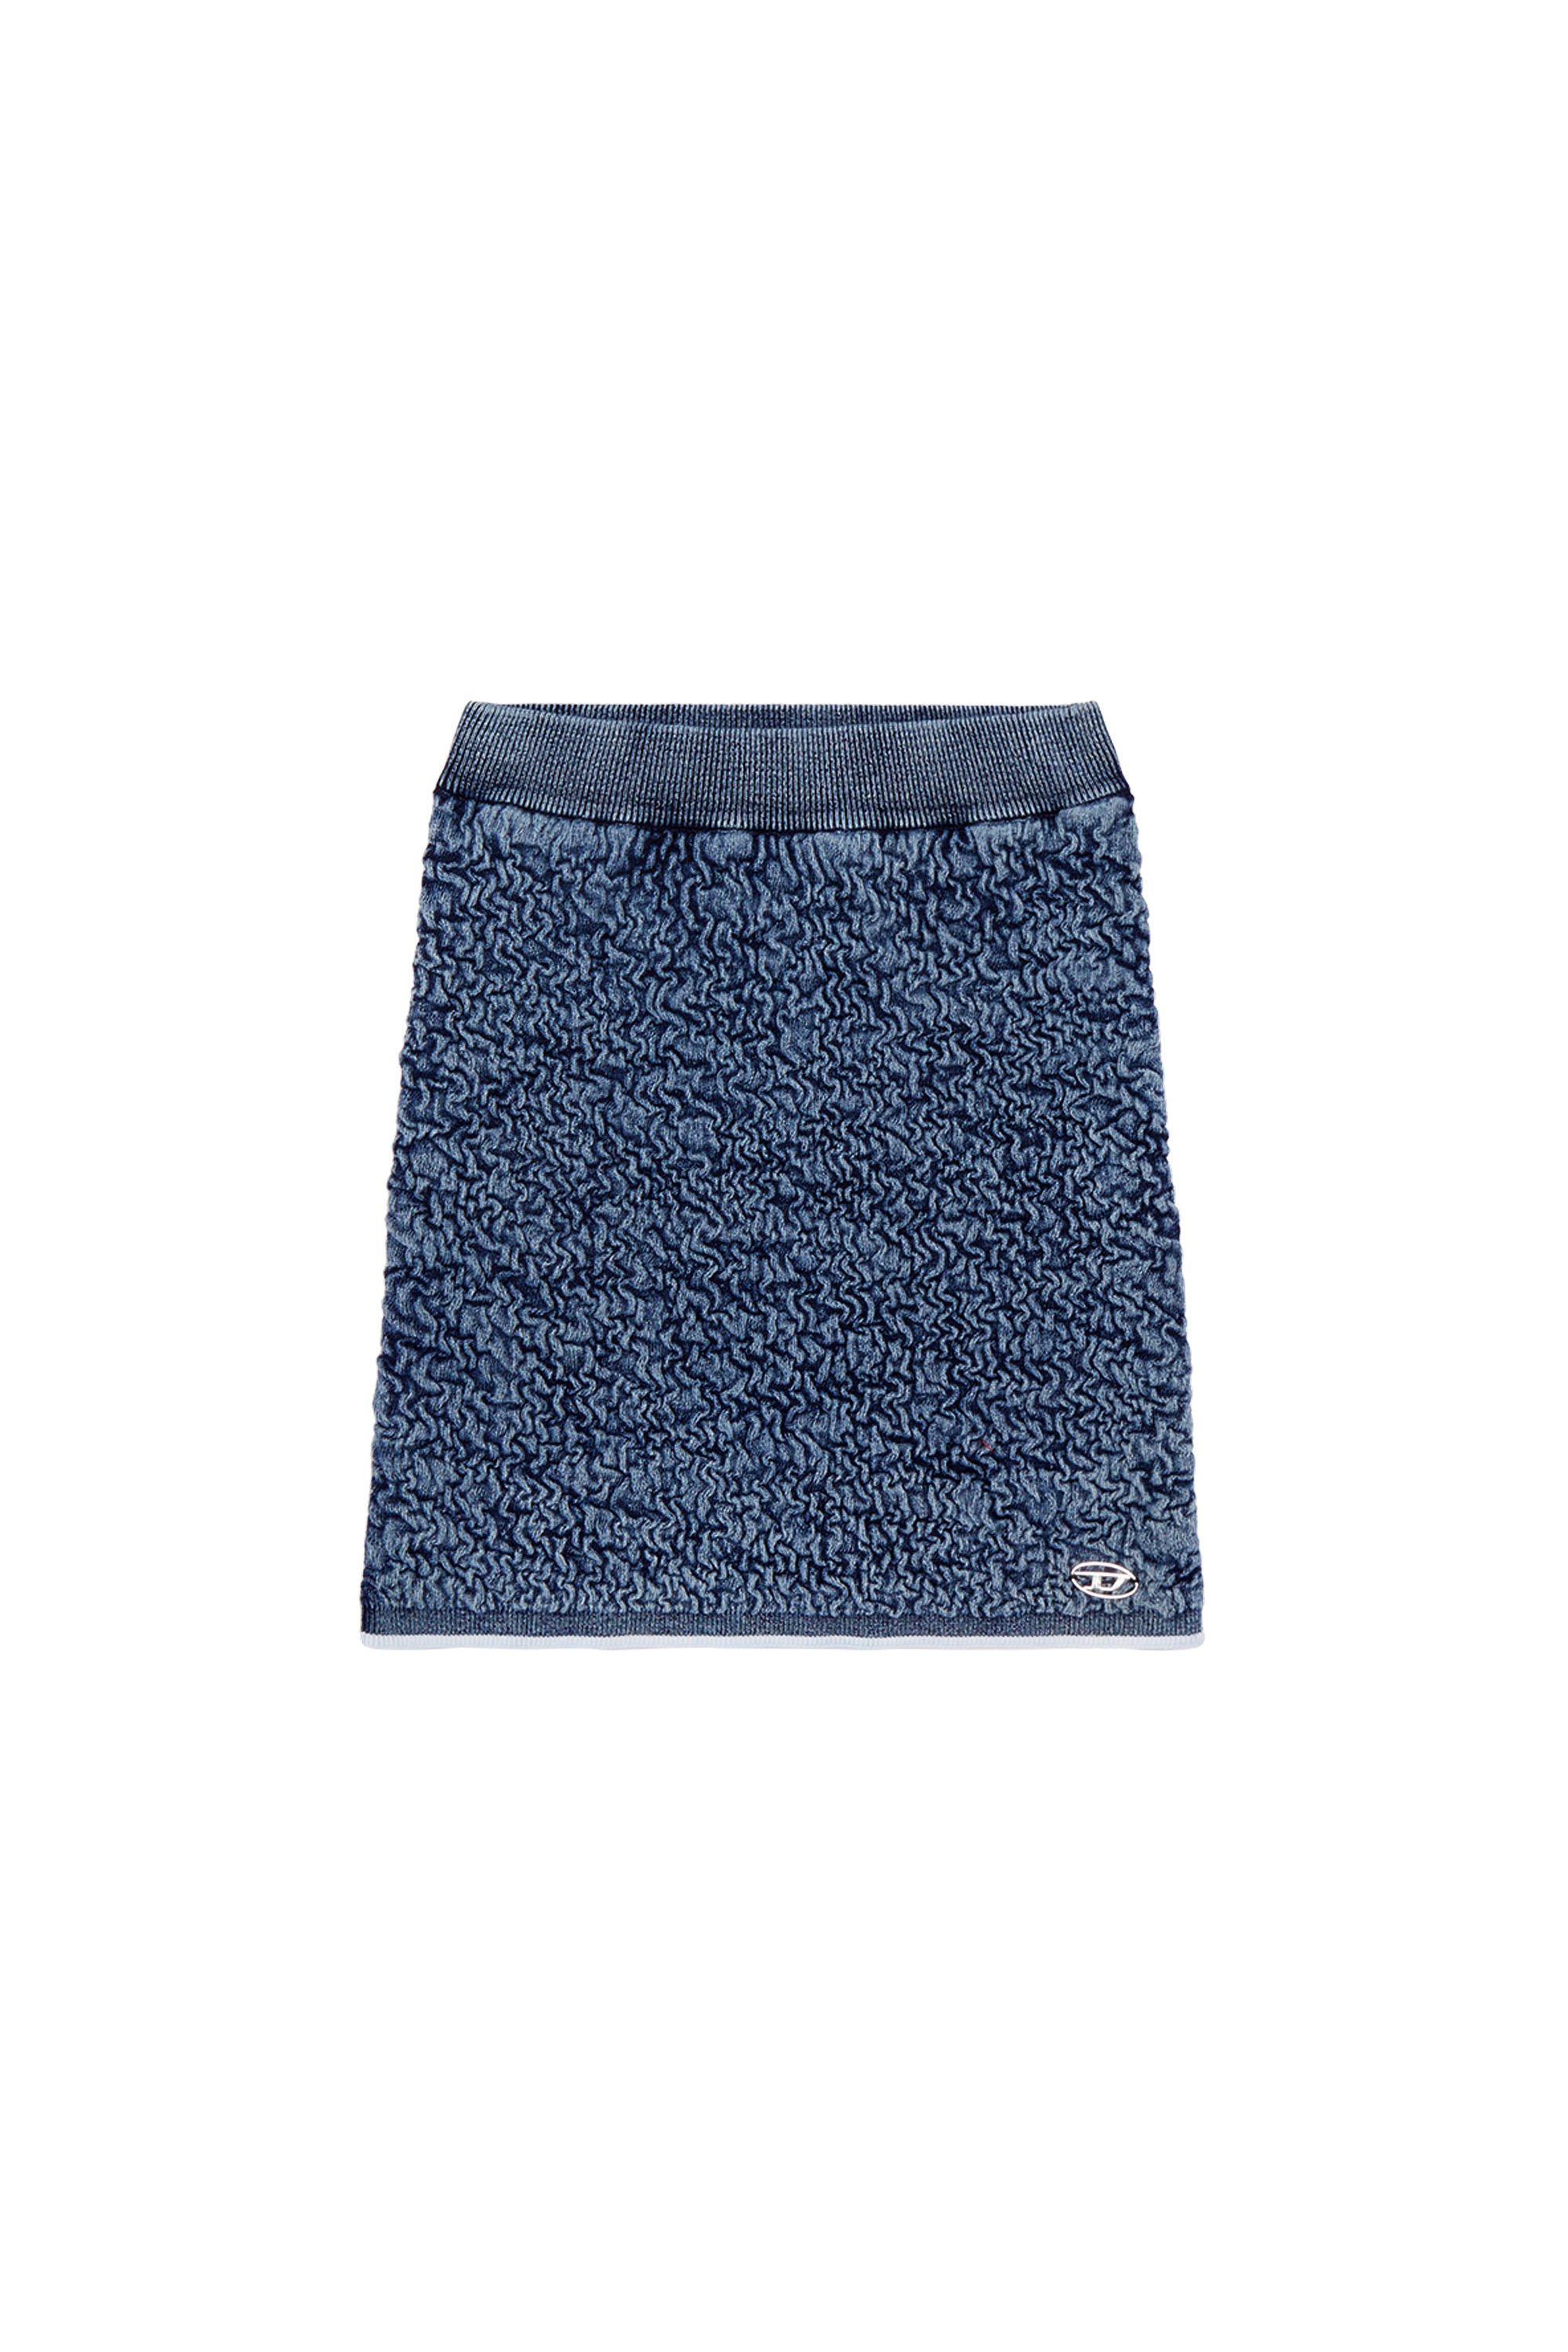 Diesel Mini Skirt With Smock Stitching In Blue